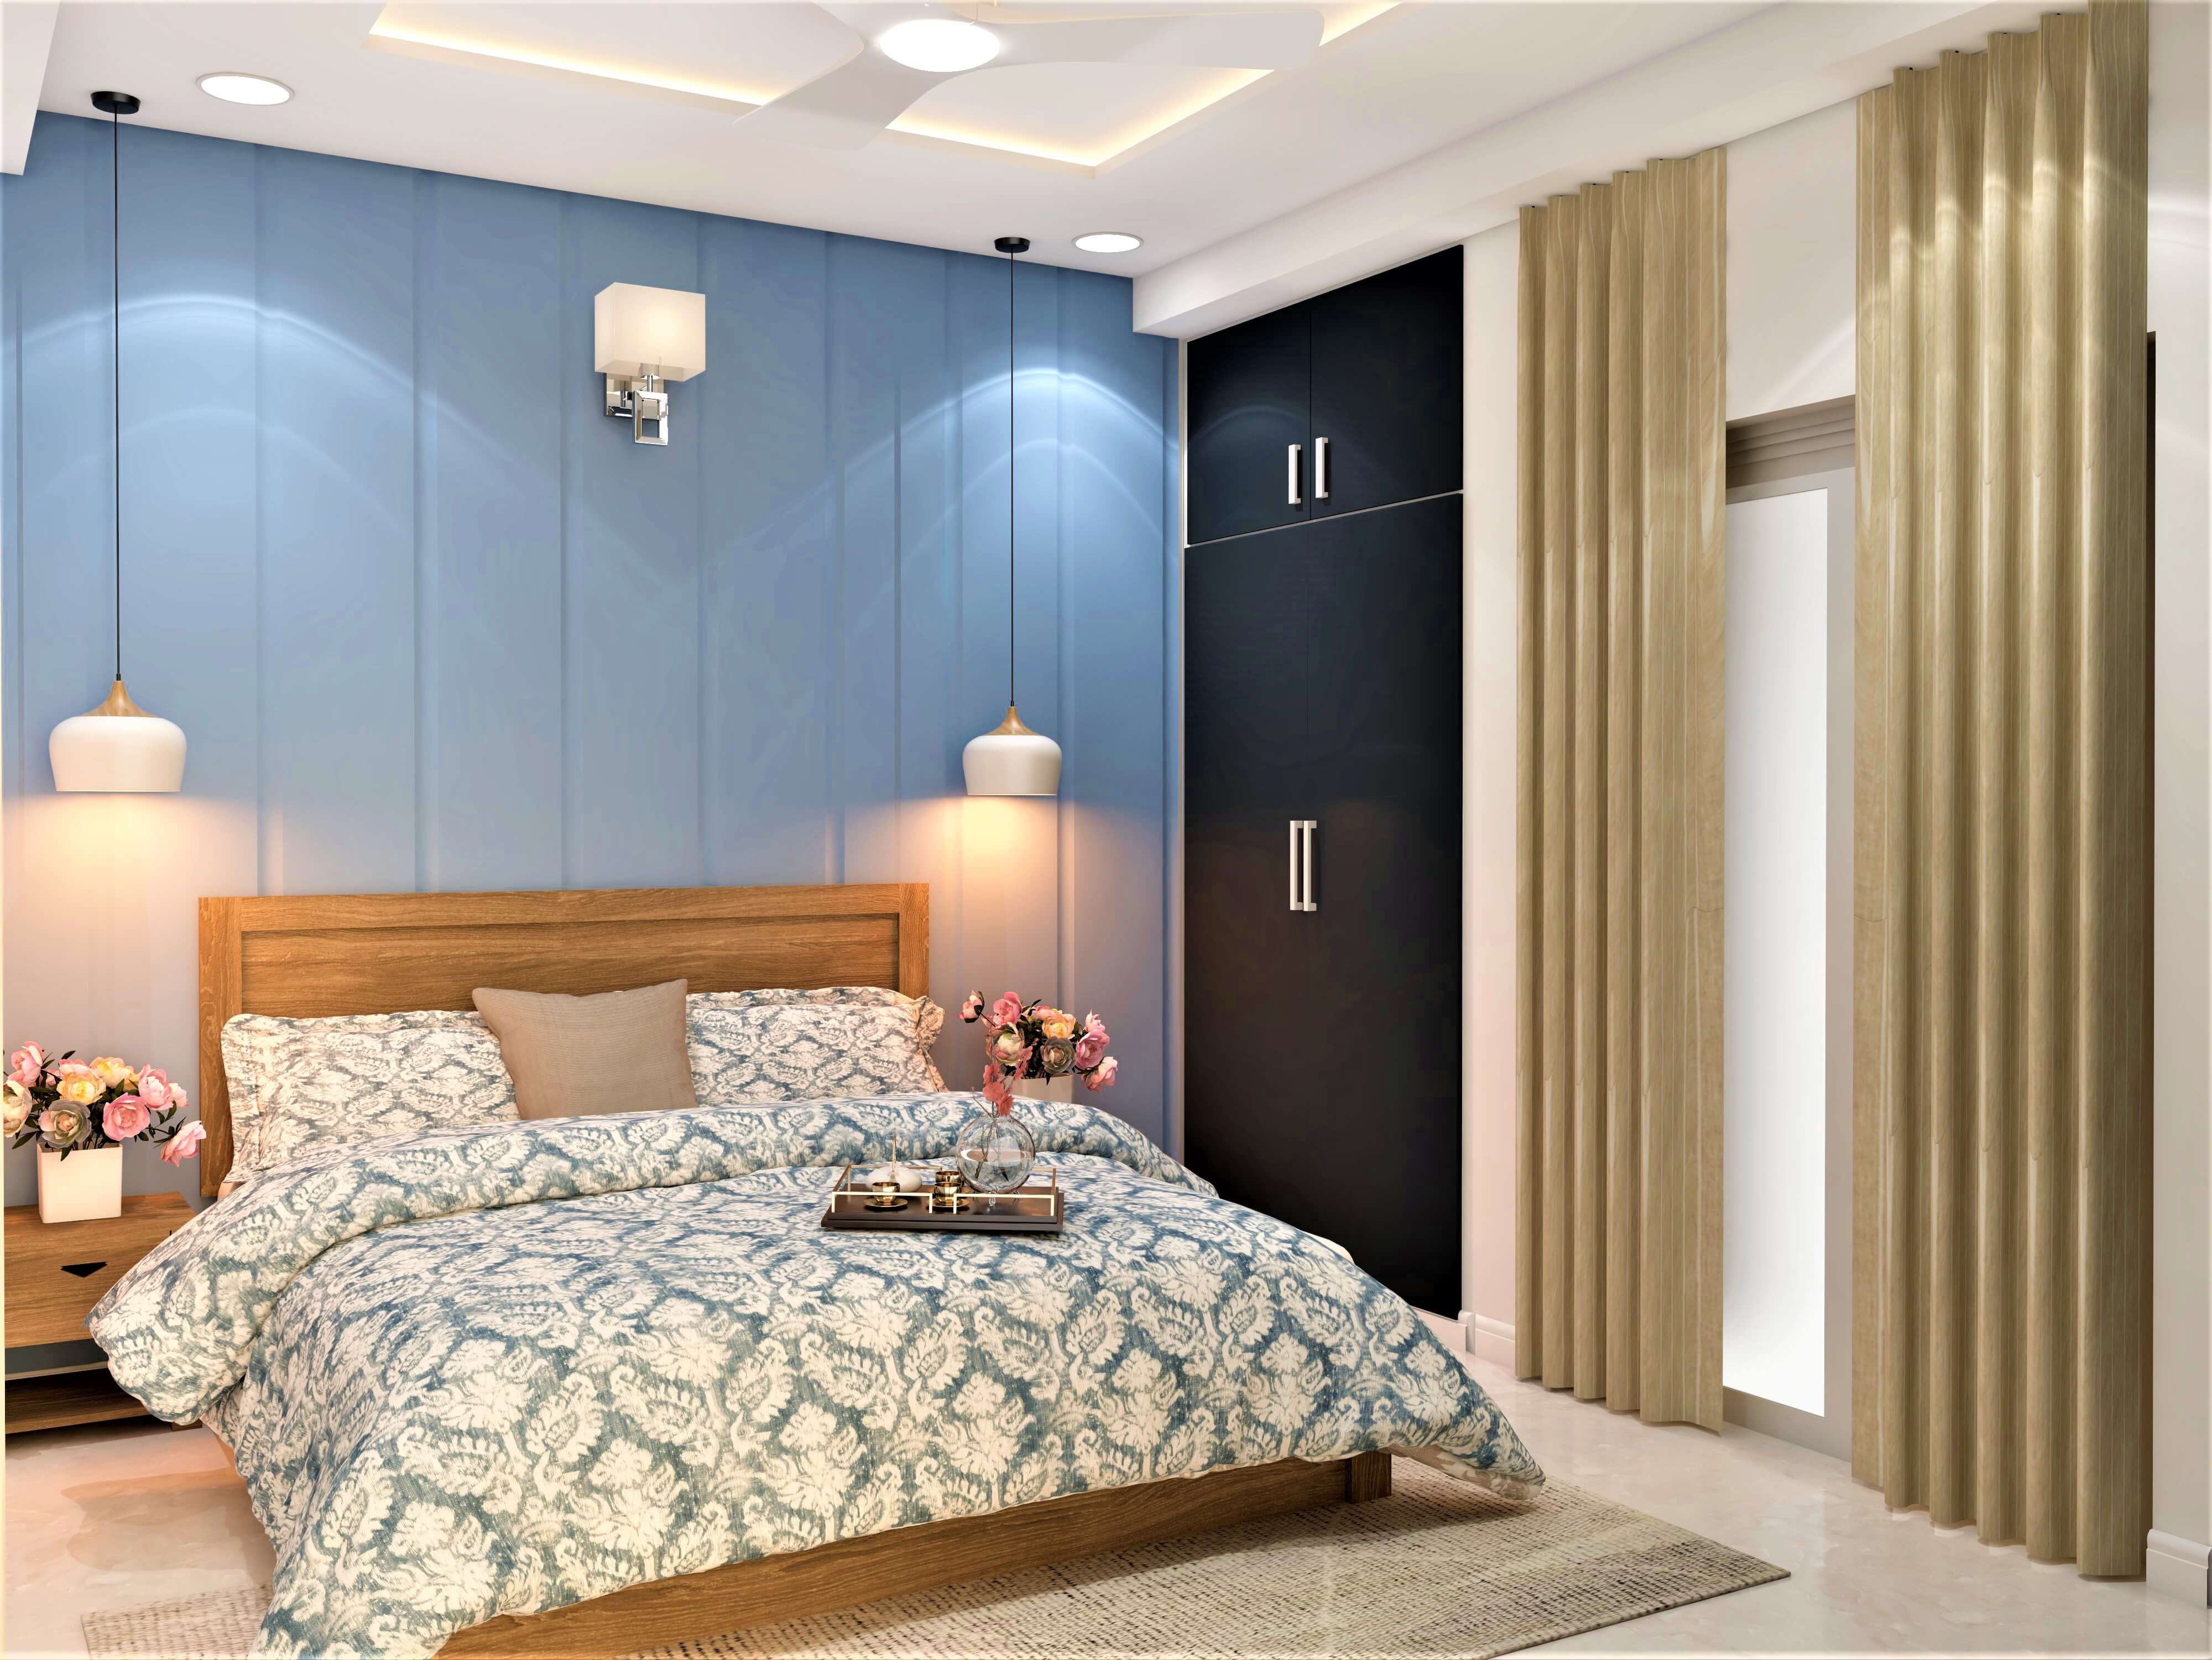 Modern bedroom design with vertical panels - Beautiful Homes